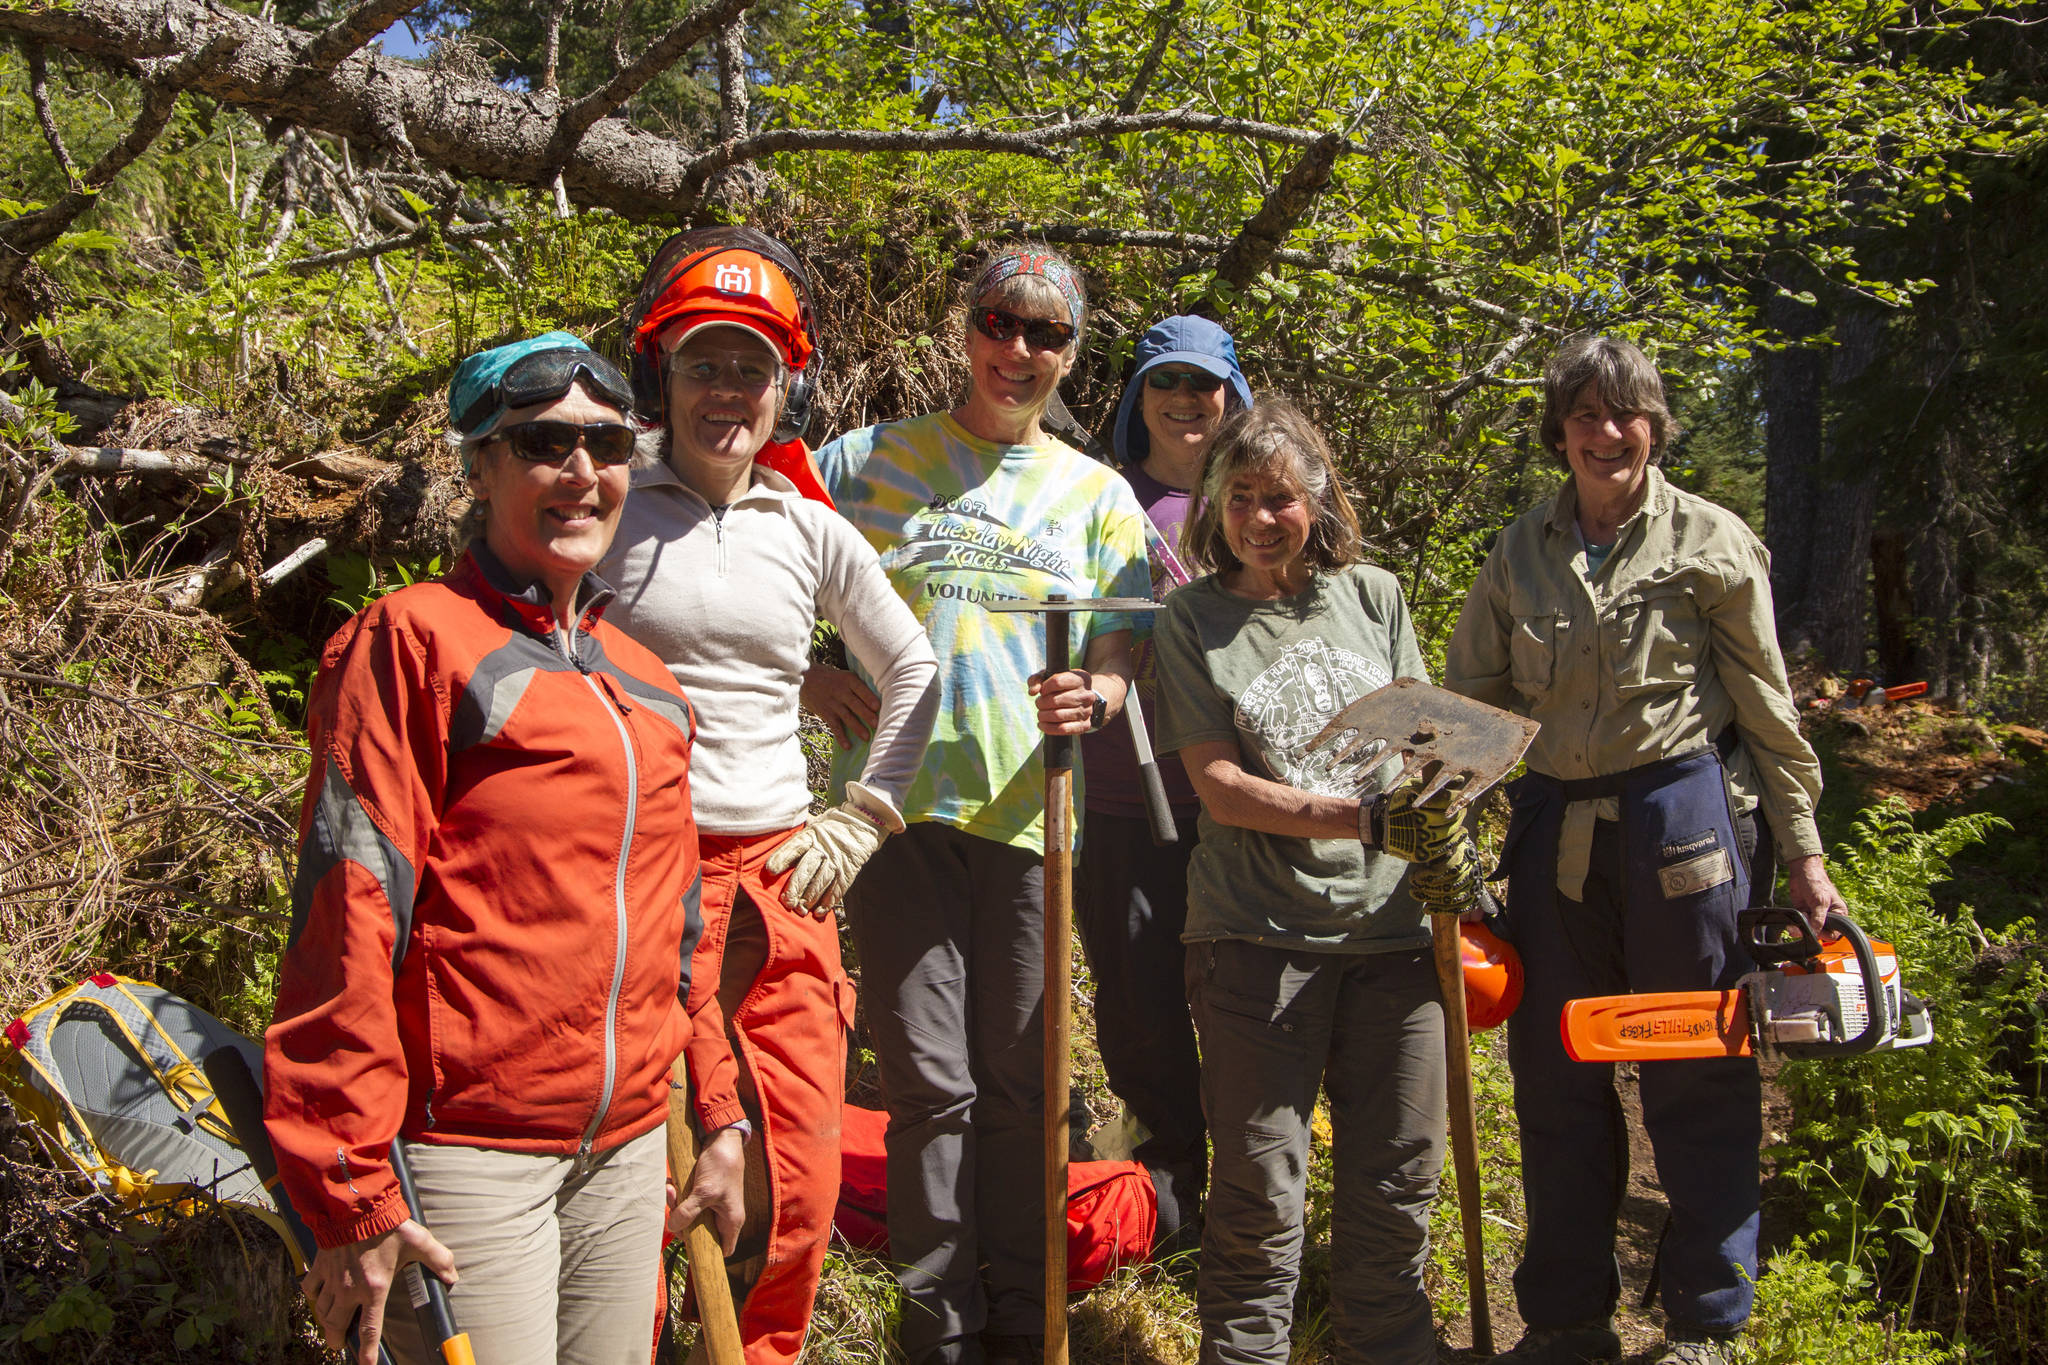 A group of six women tackled the work needing to be done at South Eldred trail including cutting up fallen trees, re-establishing the trail tread, clearing overgrown plants and ensuring the trail markings were in sight and up-to-date. Pictured left to right are Kristine Moerlien, Amy Holman, Kathy Sarns, Lyn Maslow, Ruth Dickerson and Kris Holderied. (Photo by Sarah Knapp/Homer News)